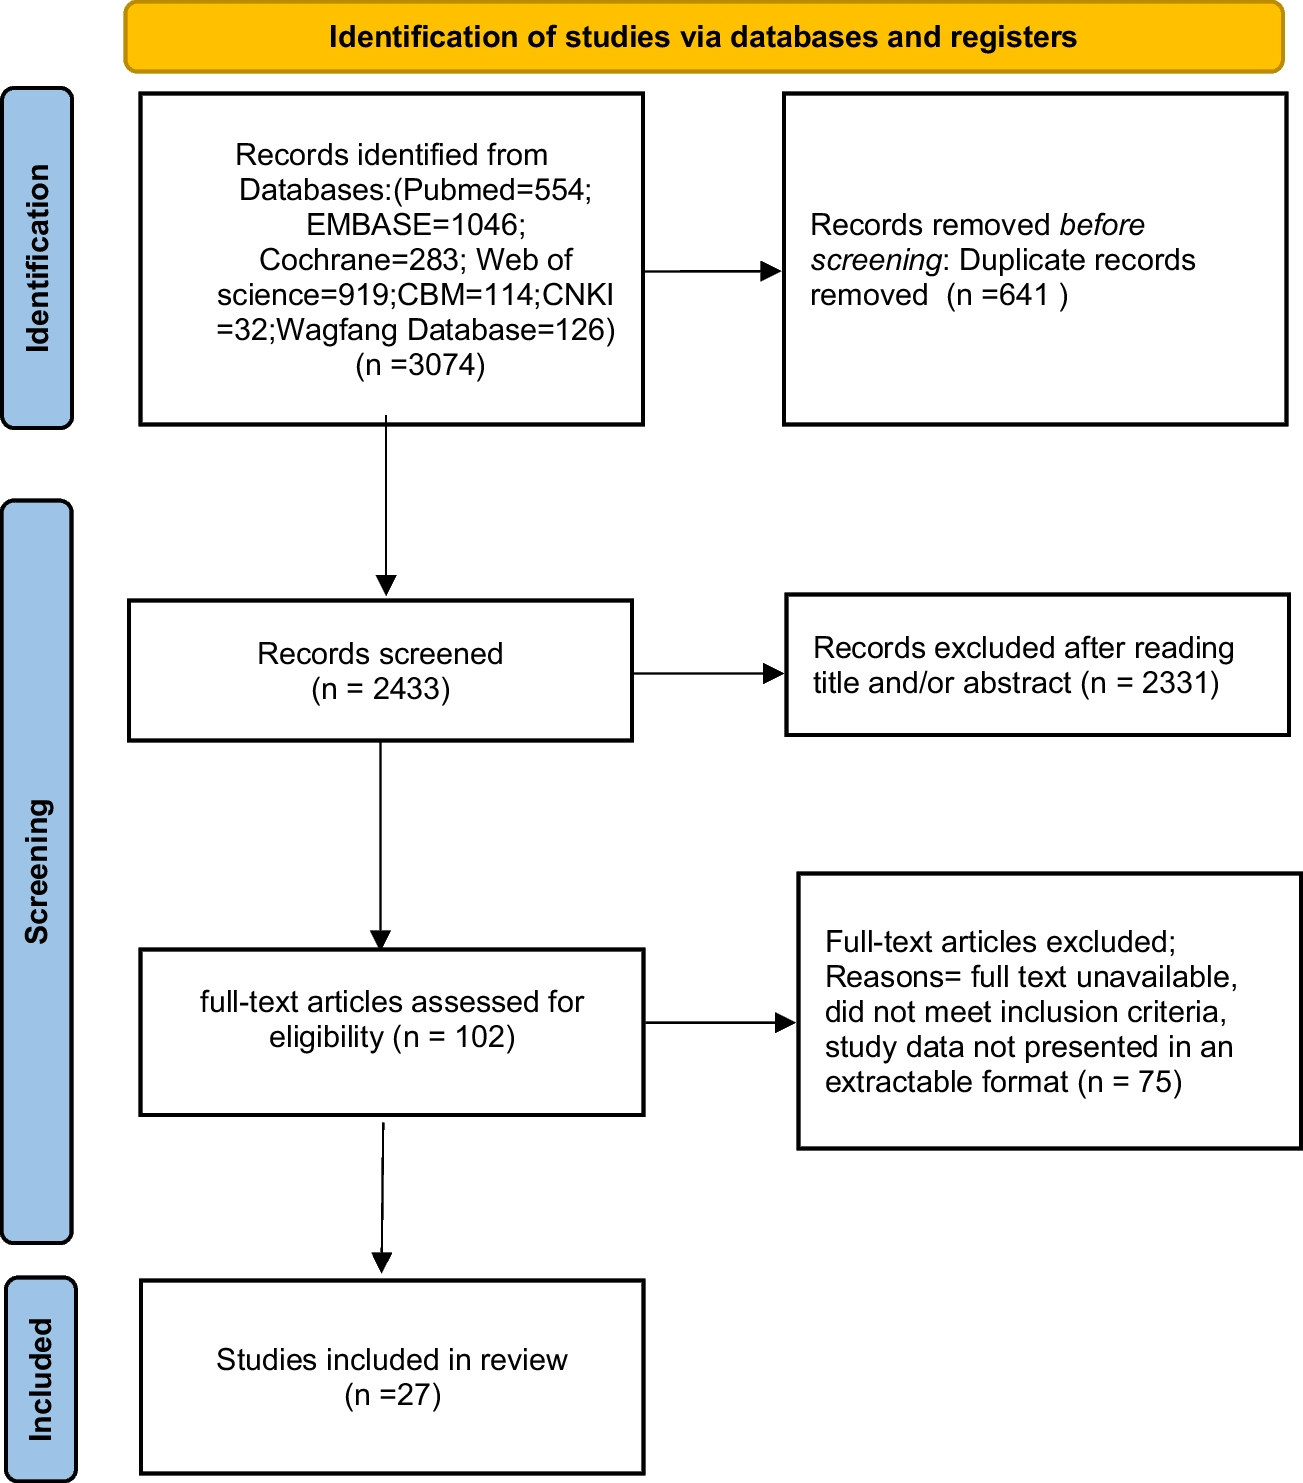 The Risk Factors of Postpartum Urinary Retention for Women by Vaginal Birth: A Systematic Review and Meta-Analysis